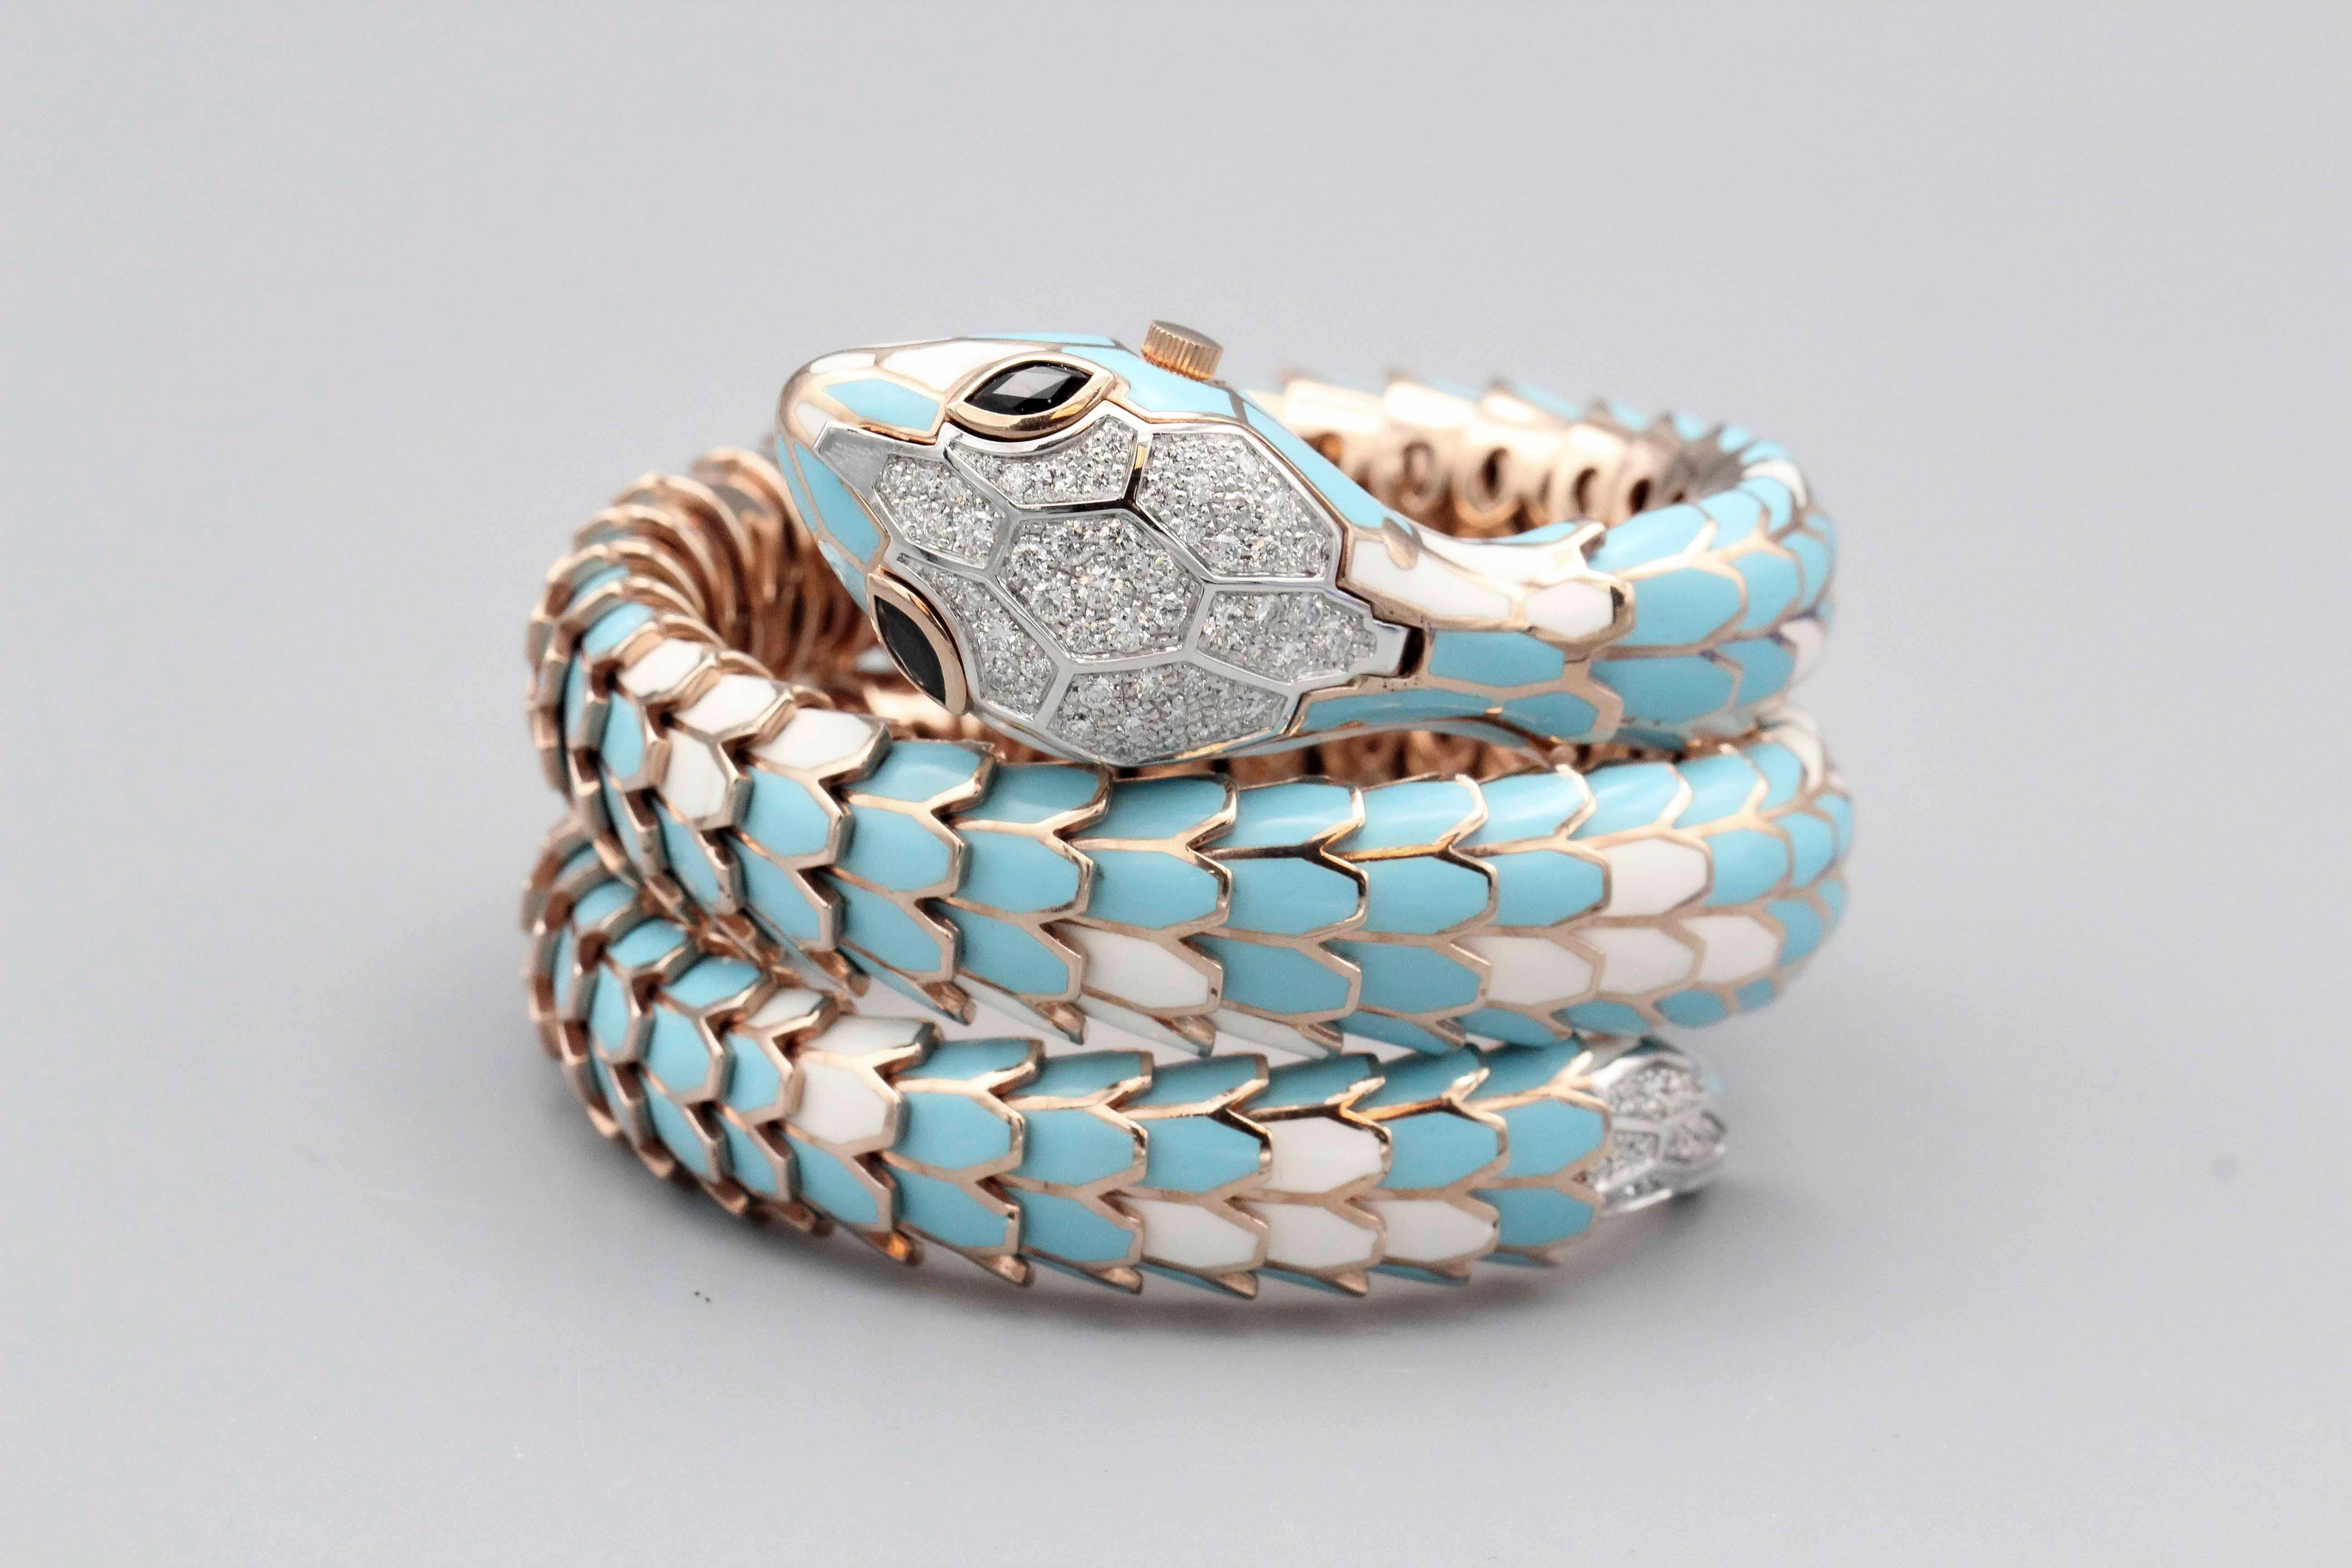 Fine Italian made snake watch bracelet, most likely by Illario whom creates snake jewelry for the likes of Bulgari.  Made in silver, with diamond set 18k white gold scales on the head and tail of the bracelet, and featuring sapphire eyes; underneath